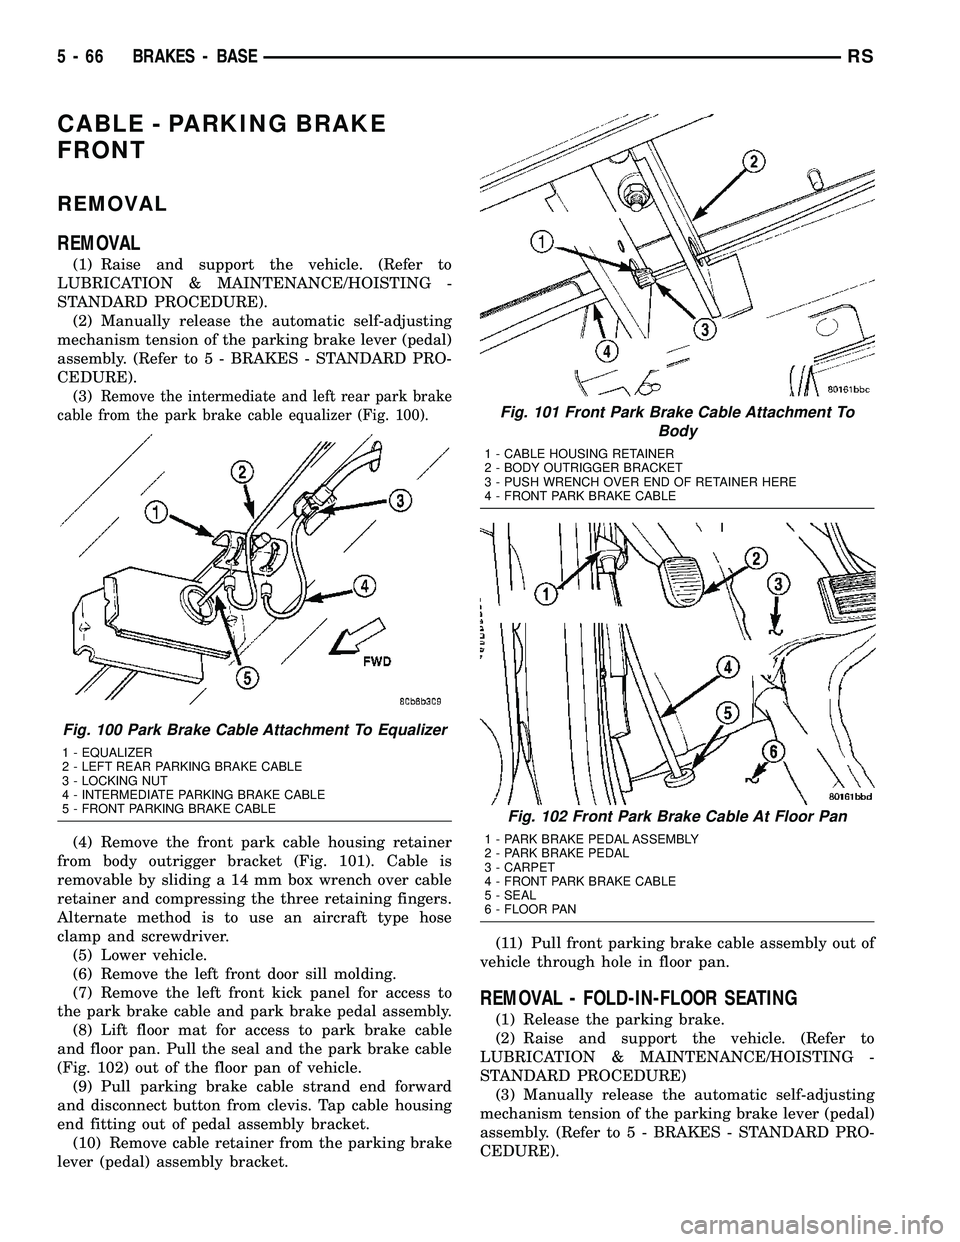 CHRYSLER VOYAGER 2005  Service Manual CABLE - PARKING BRAKE
FRONT
REMOVAL
REMOVAL
(1) Raise and support the vehicle. (Refer to
LUBRICATION & MAINTENANCE/HOISTING -
STANDARD PROCEDURE).
(2) Manually release the automatic self-adjusting
mec